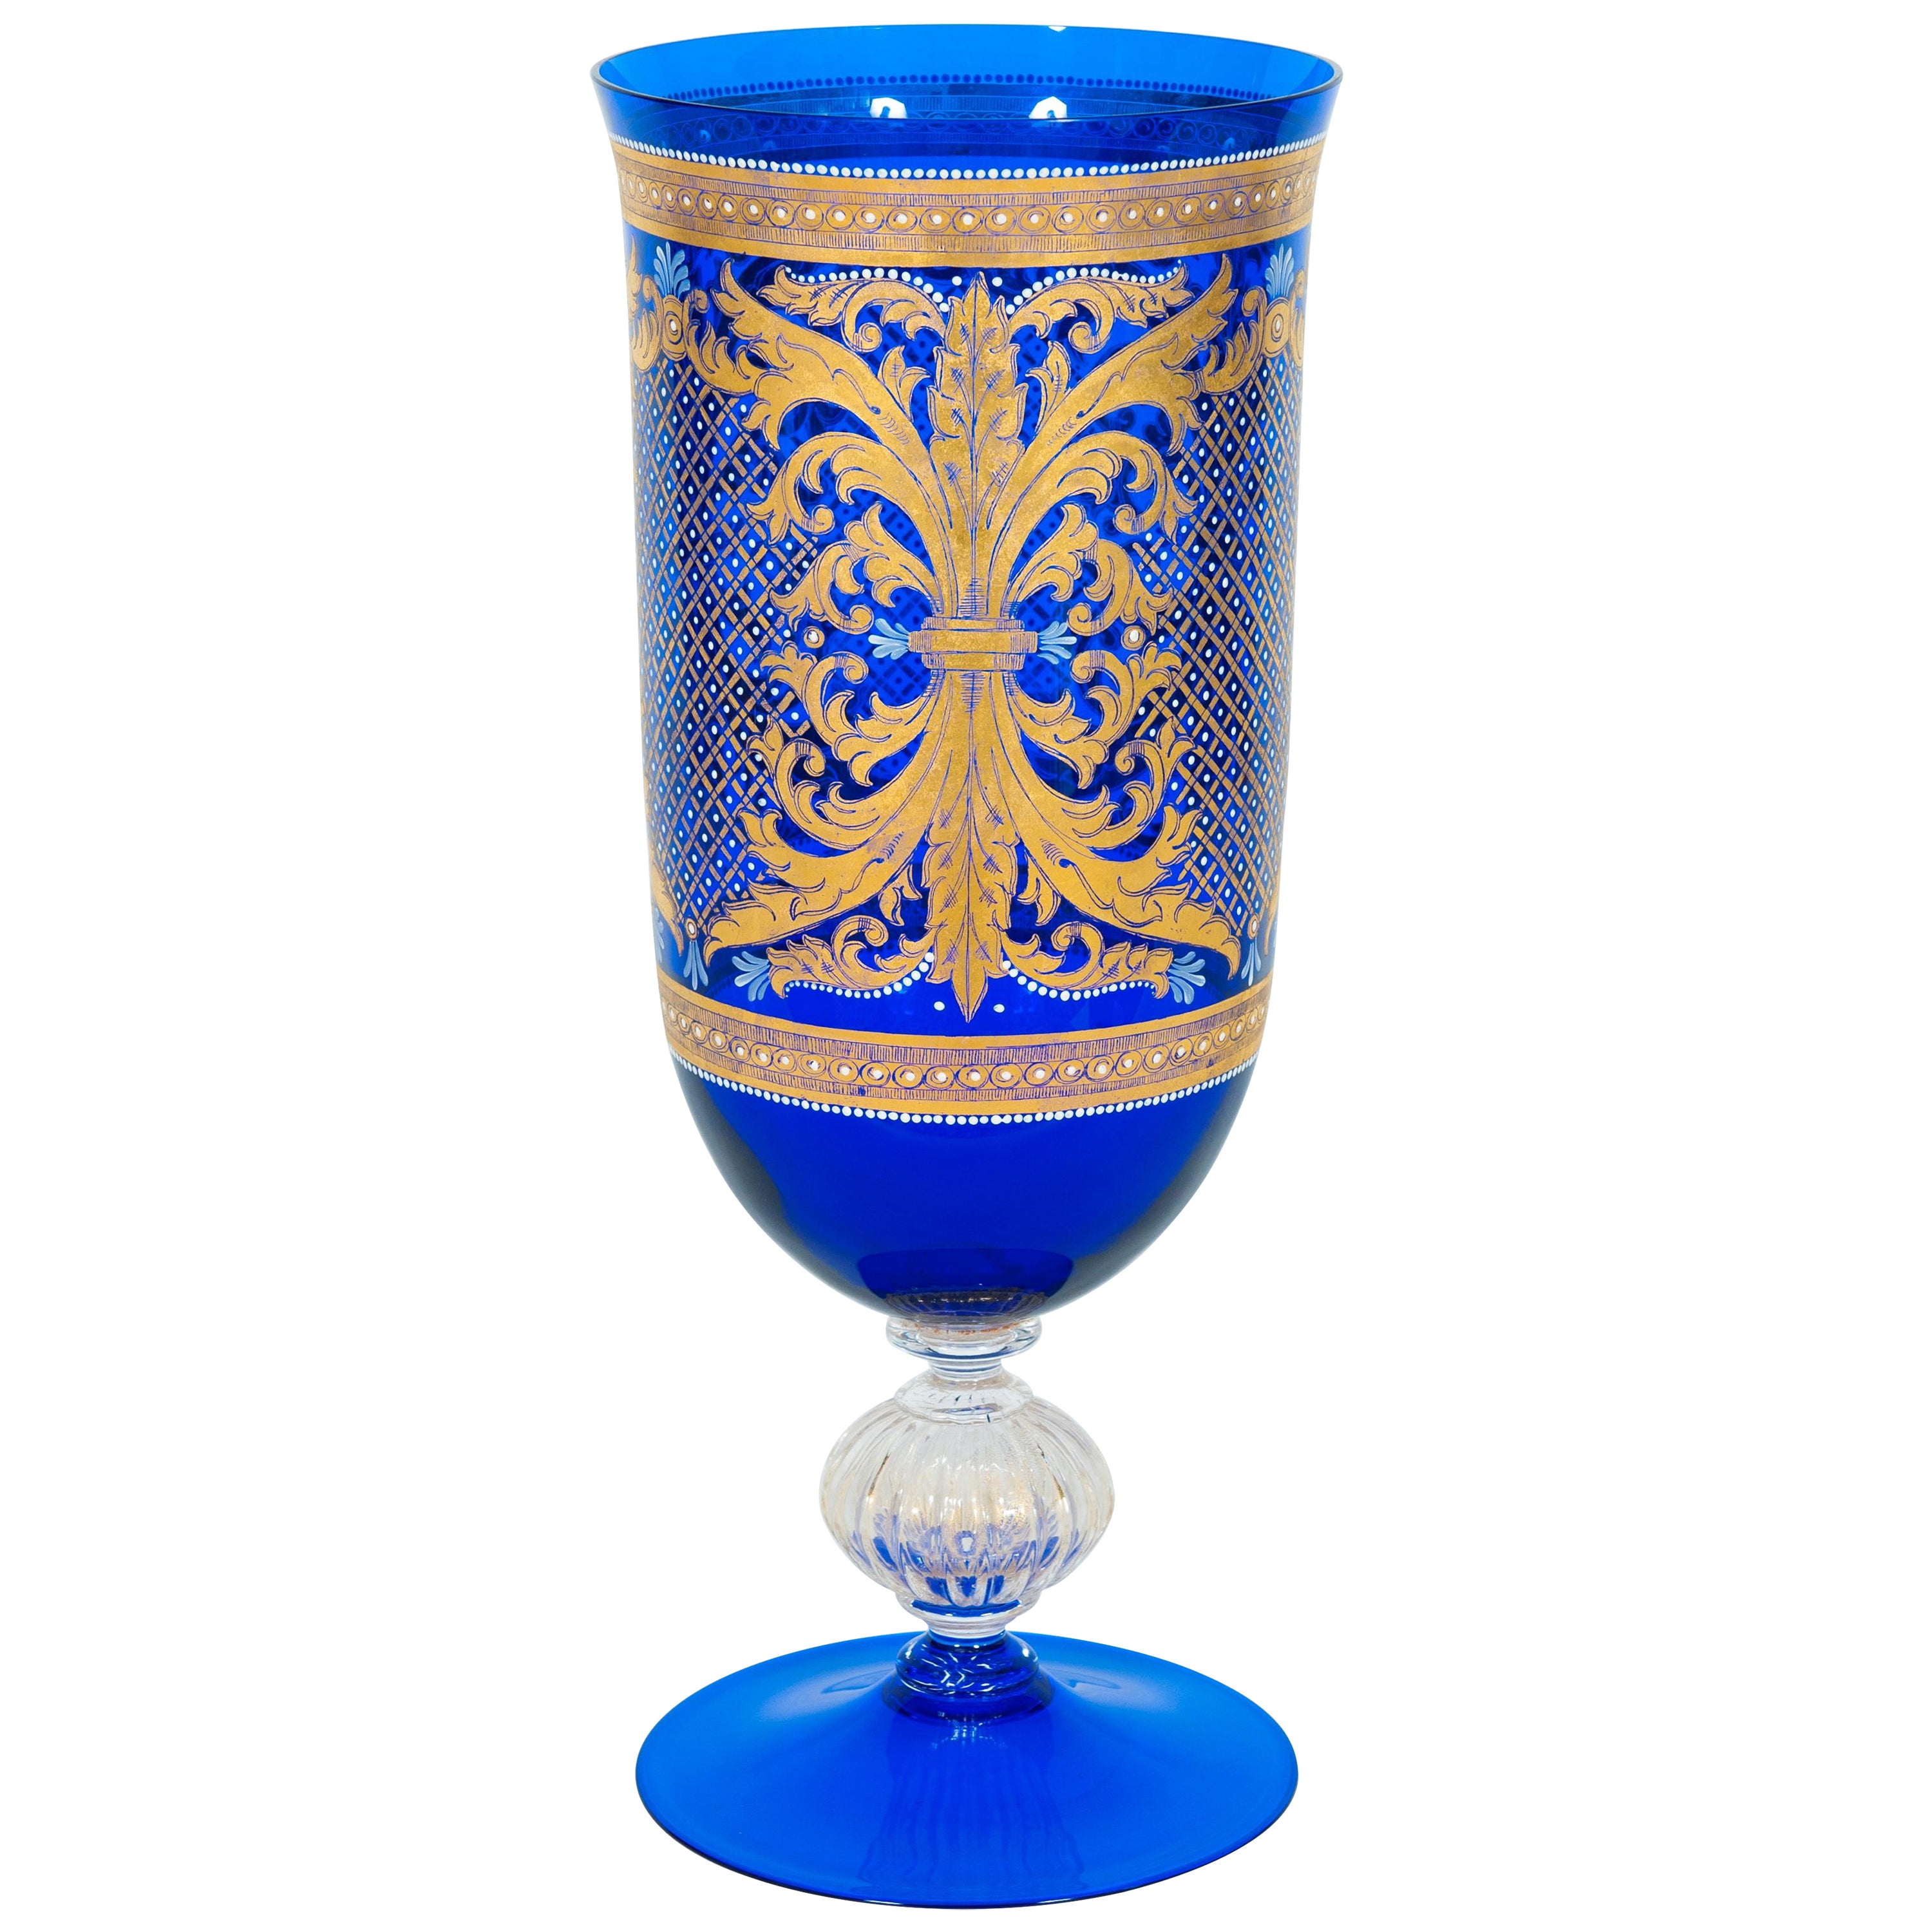 Extra-Large Murano Glass Cup with 24-Carat Gold Decorations, Italy, 1960s